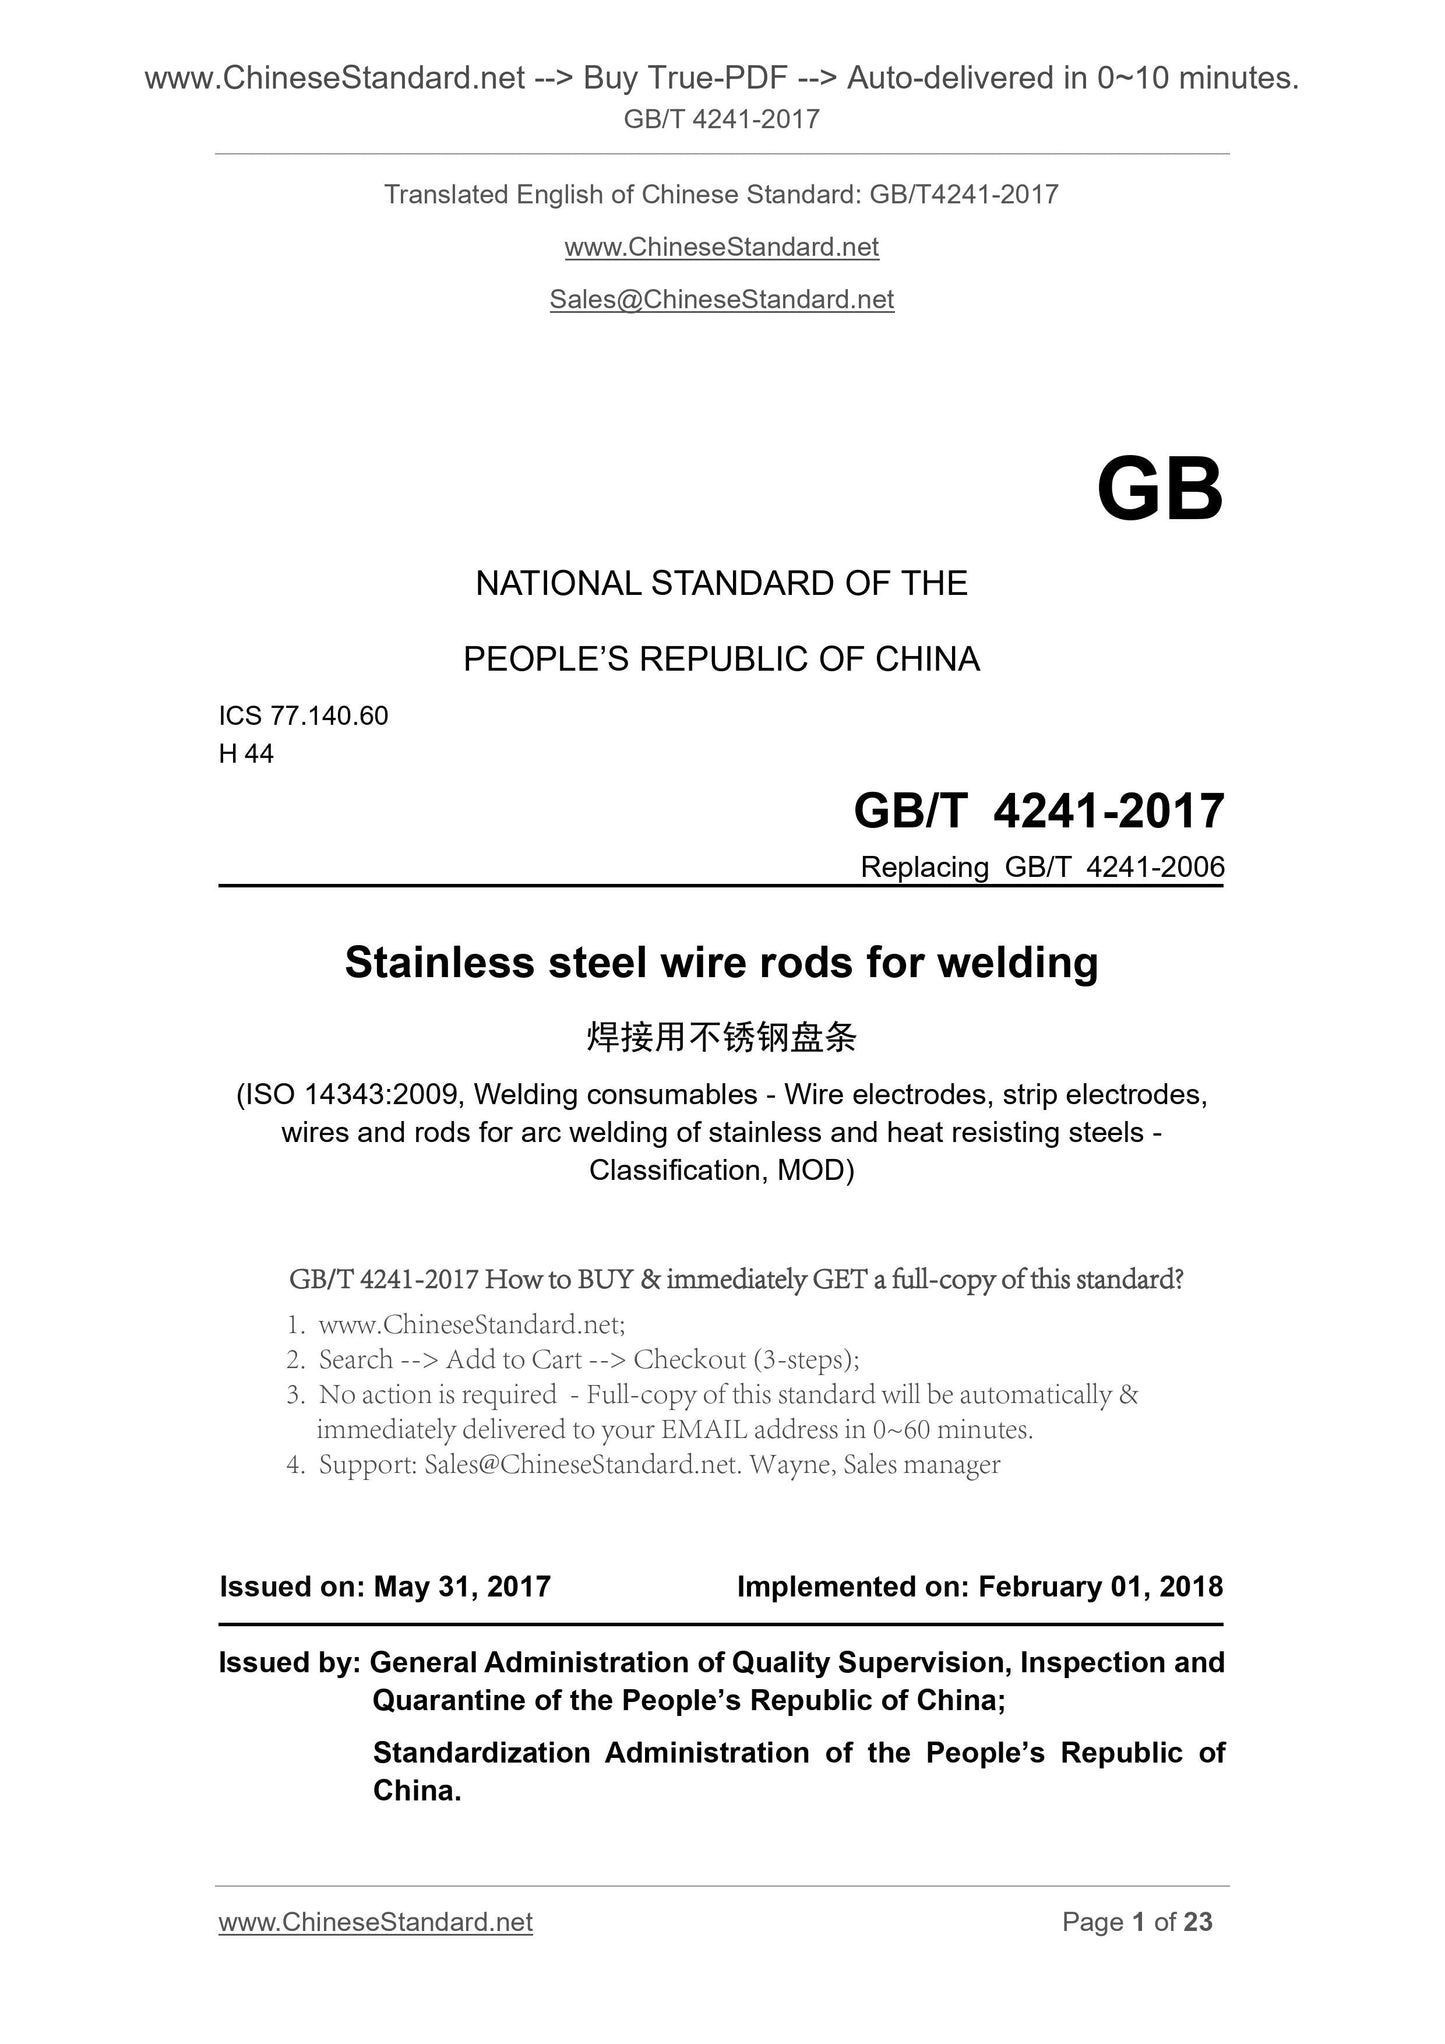 GB/T 4241-2017 Page 1